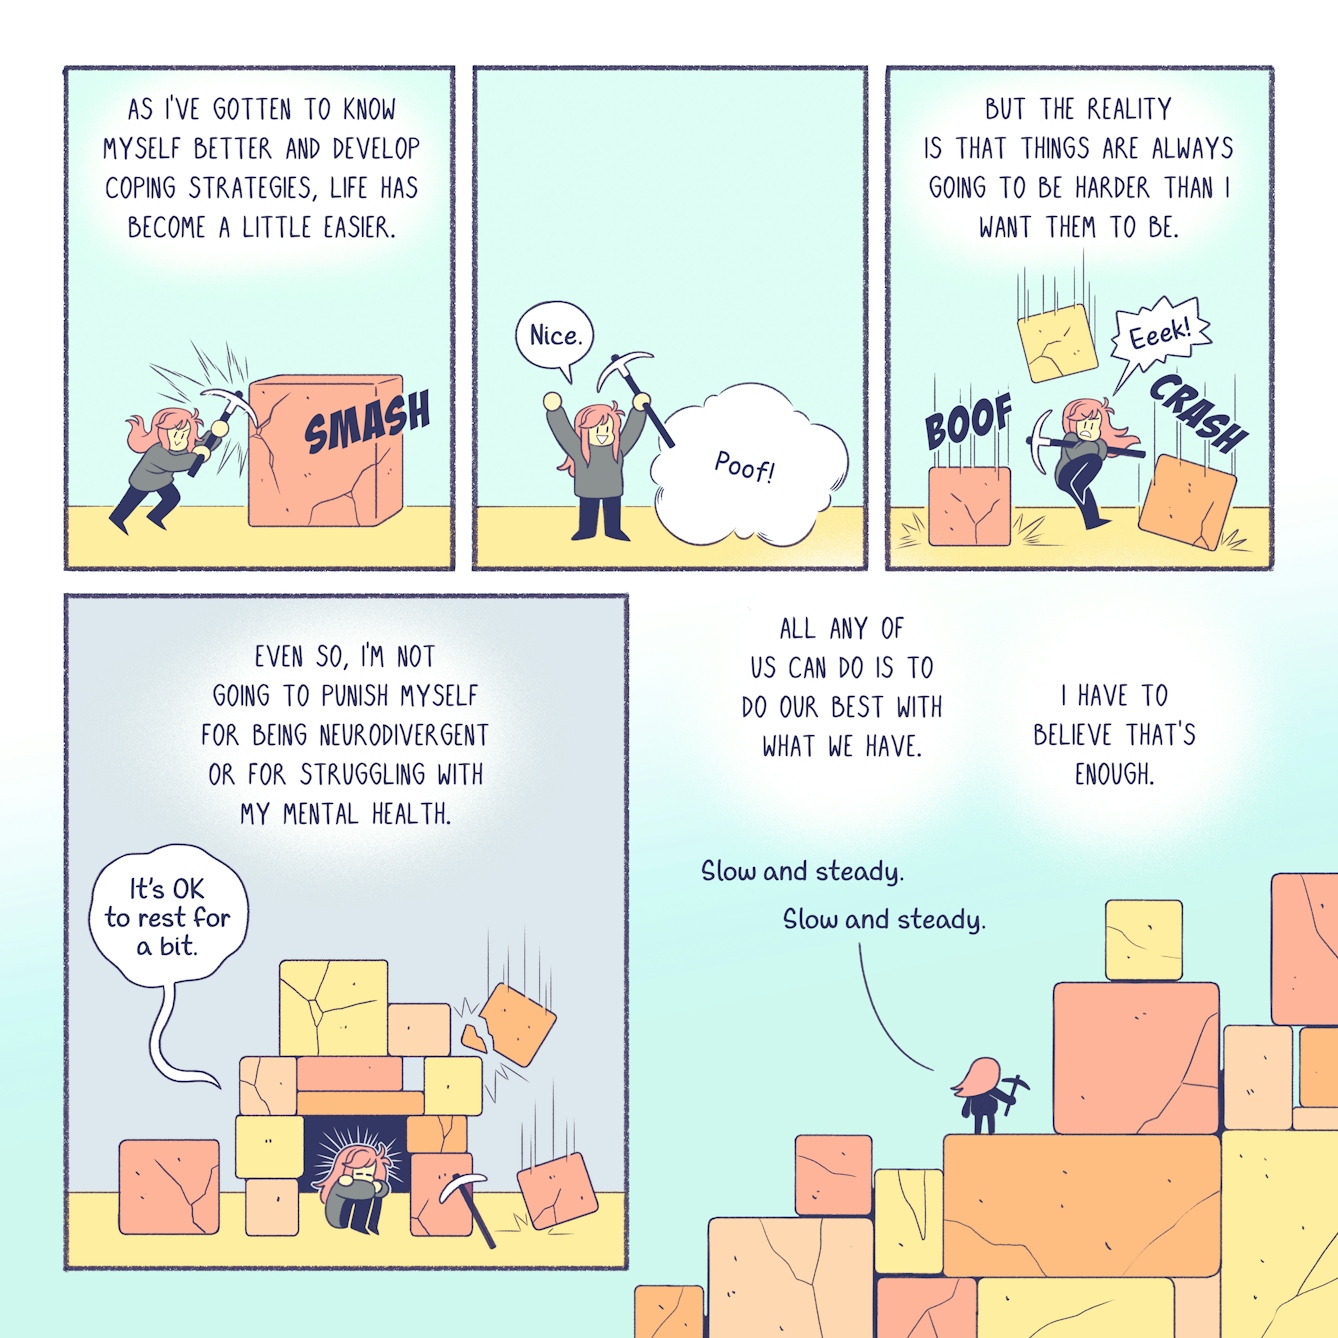 A short 5 panel comic about the ups and downs of life.

A girl with pink hair uses a strong, iron pickaxe to smash into a stone block that's in her path. The narration reads, 'as I've gotten to know myself better and develop coping strategies, life has become a little easier.'

In the second panel, the block disappears with a 'poof.' The pink haired girl triumphantly waves her arms in the air and says, 'nice!'

In the third panel, the narration reads, 'But the reality is that things are always going to be harder than I want them to be.' The pink haired girl leaps into the air while three more blocks descend from above and crash around her. She lets out a terrified 'Eek!'

In the fourth panel, the pink haired girl has made a shelter amidst the stone blocks. Huddled inside, she says, 'it's OK to rest for a bit,' while the narration reads, 'Even so, I'm not going to punish myself for being neurodivergent or for struggling with my mental health.'

In the final panel, we see the pink haired girl from a distance, climbing a monumental pile of stone blocks. With her pickaxe firm in hand, she tells herself 'slow and steady, slow and steady.' The narration reads, 'All any of us can do is to do our best with what we have. I have to believe that's enough.'